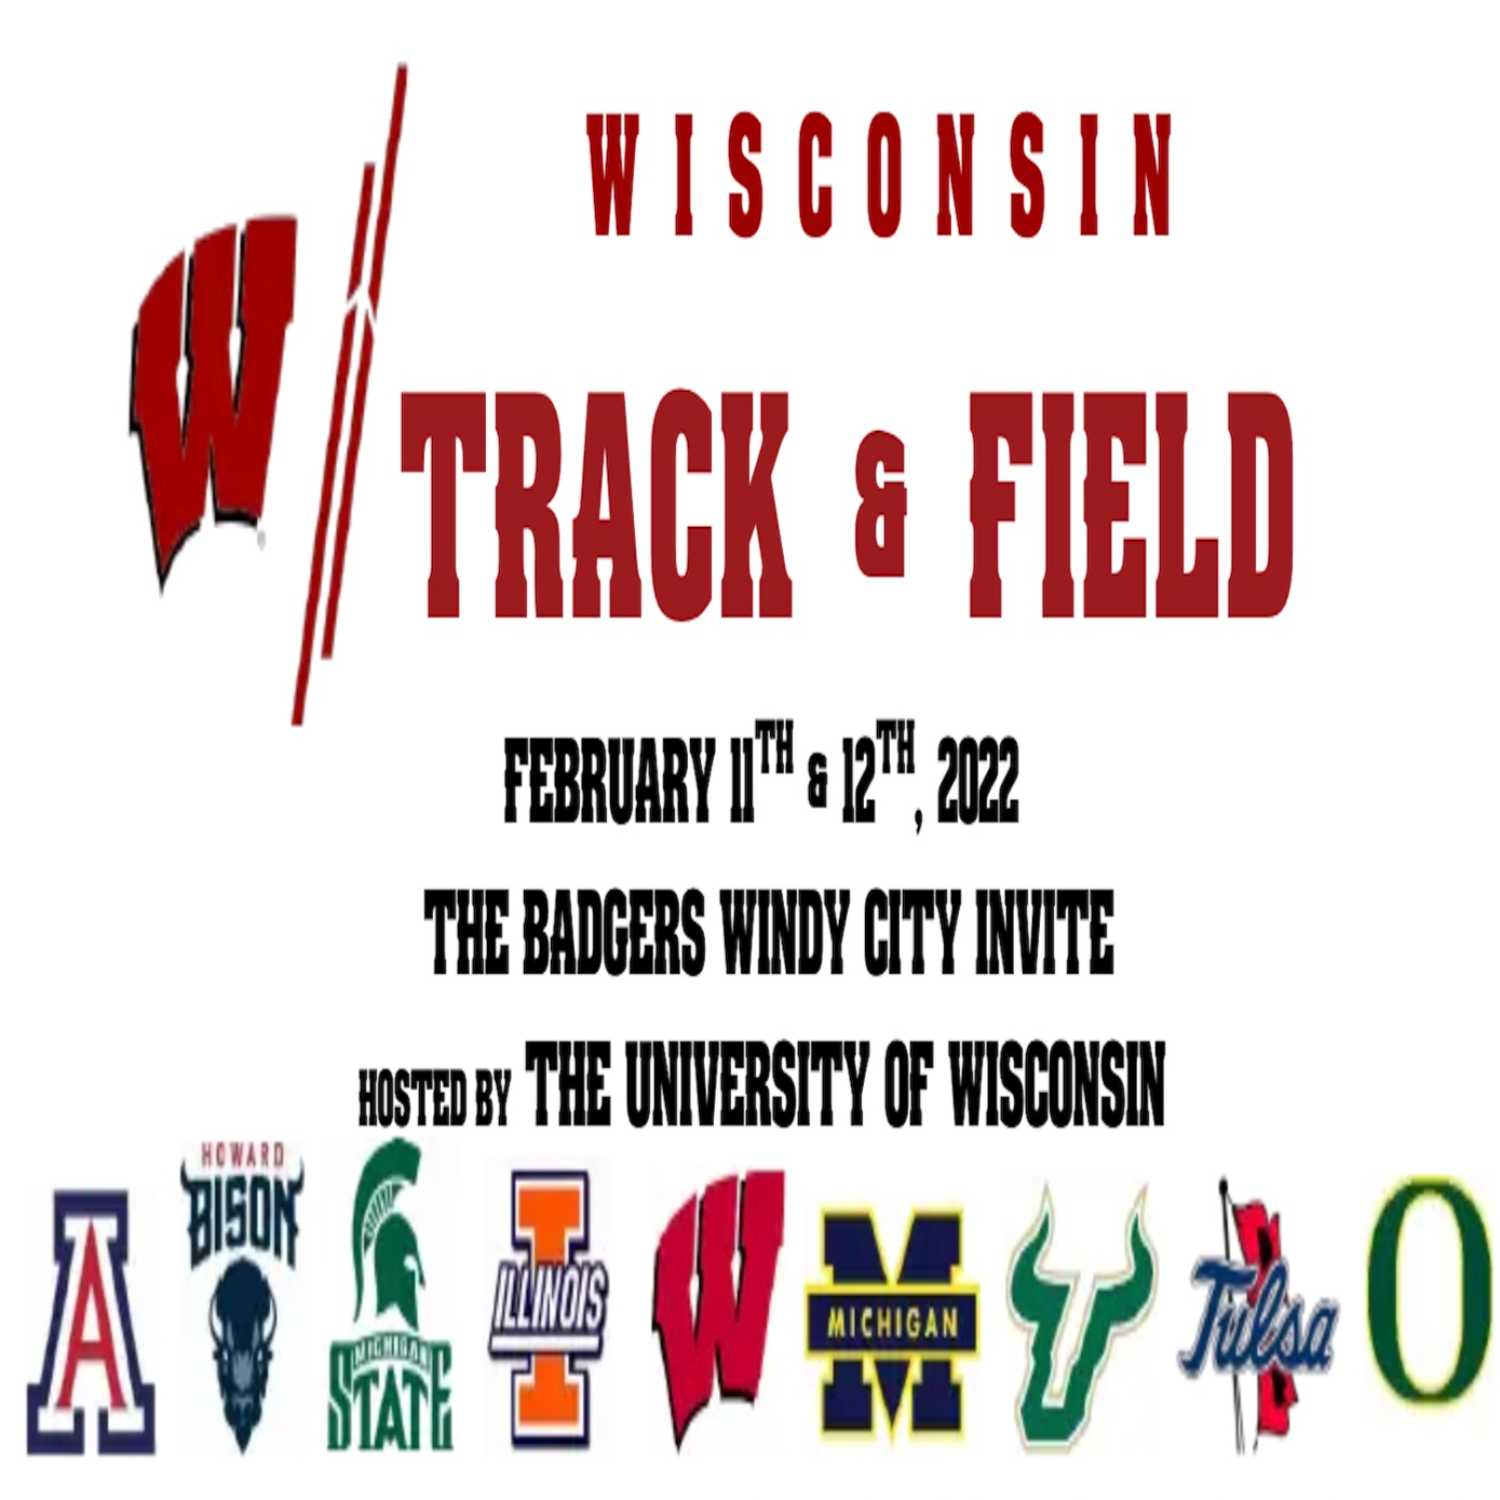 {{Meet Recap with TG}}: 3:50.17 Mile @ the Badgers' Windy City Invite